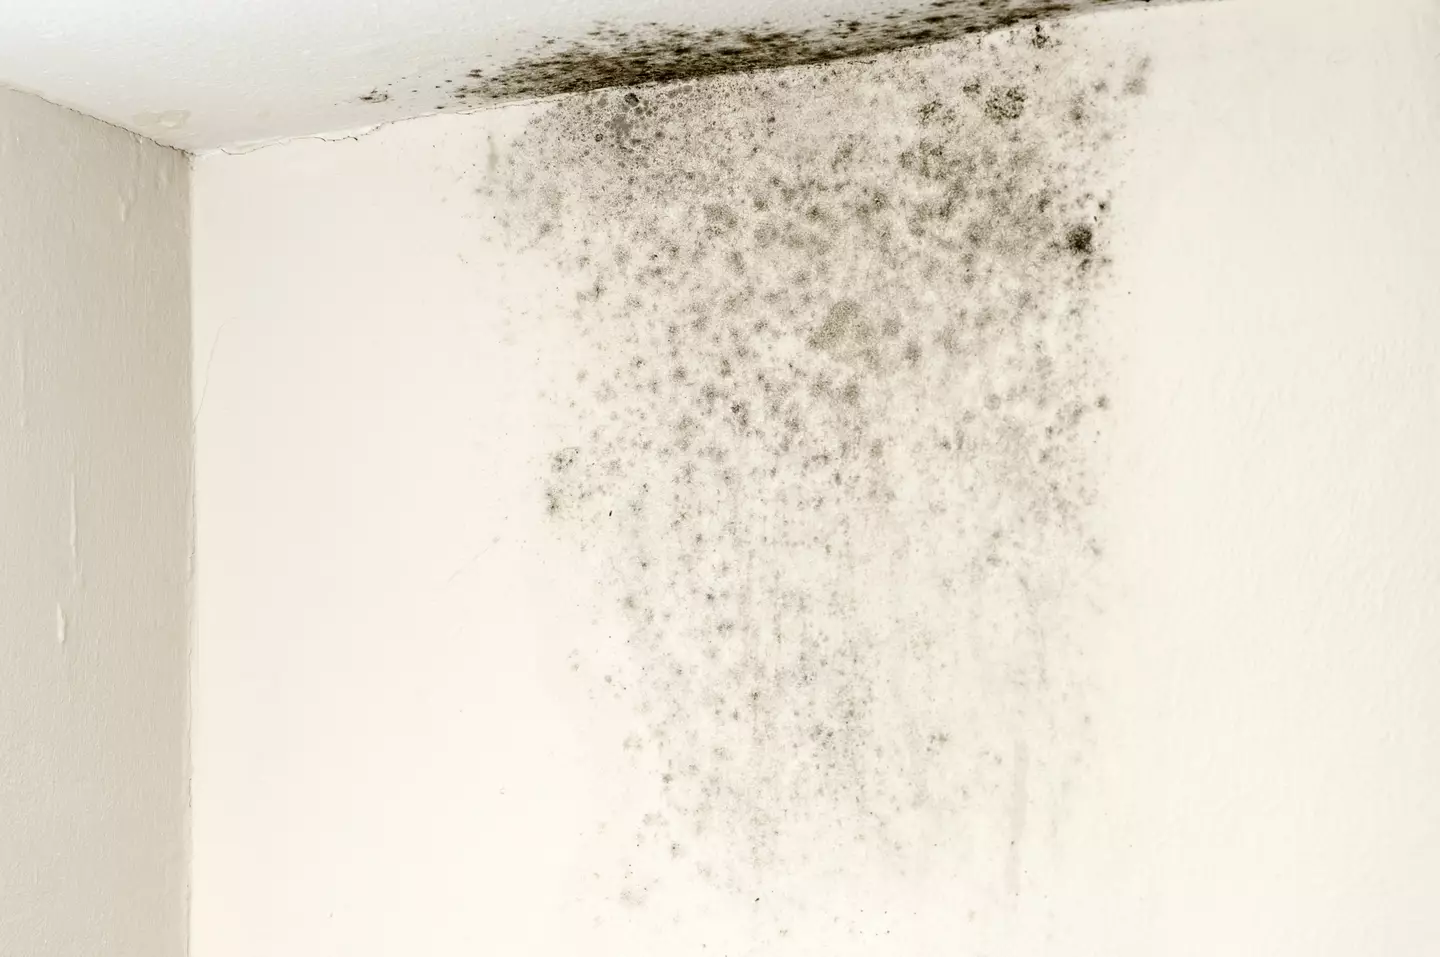 Mould on walls can bring on asthma attacks.